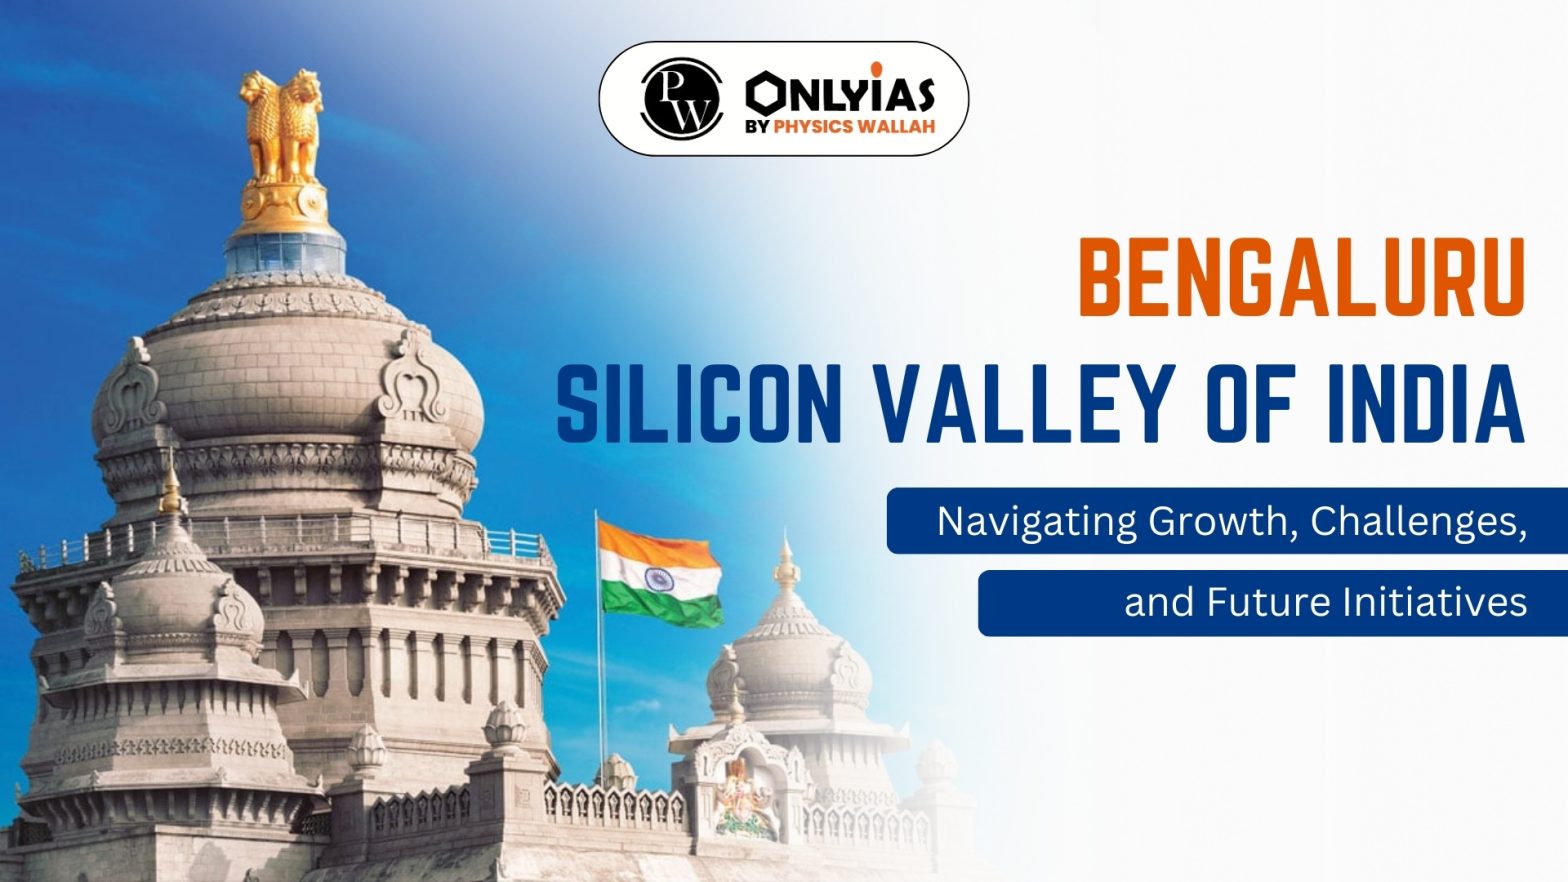 Bengaluru: Silicon Valley of India –  Navigating Growth, Challenges, and Future Initiatives